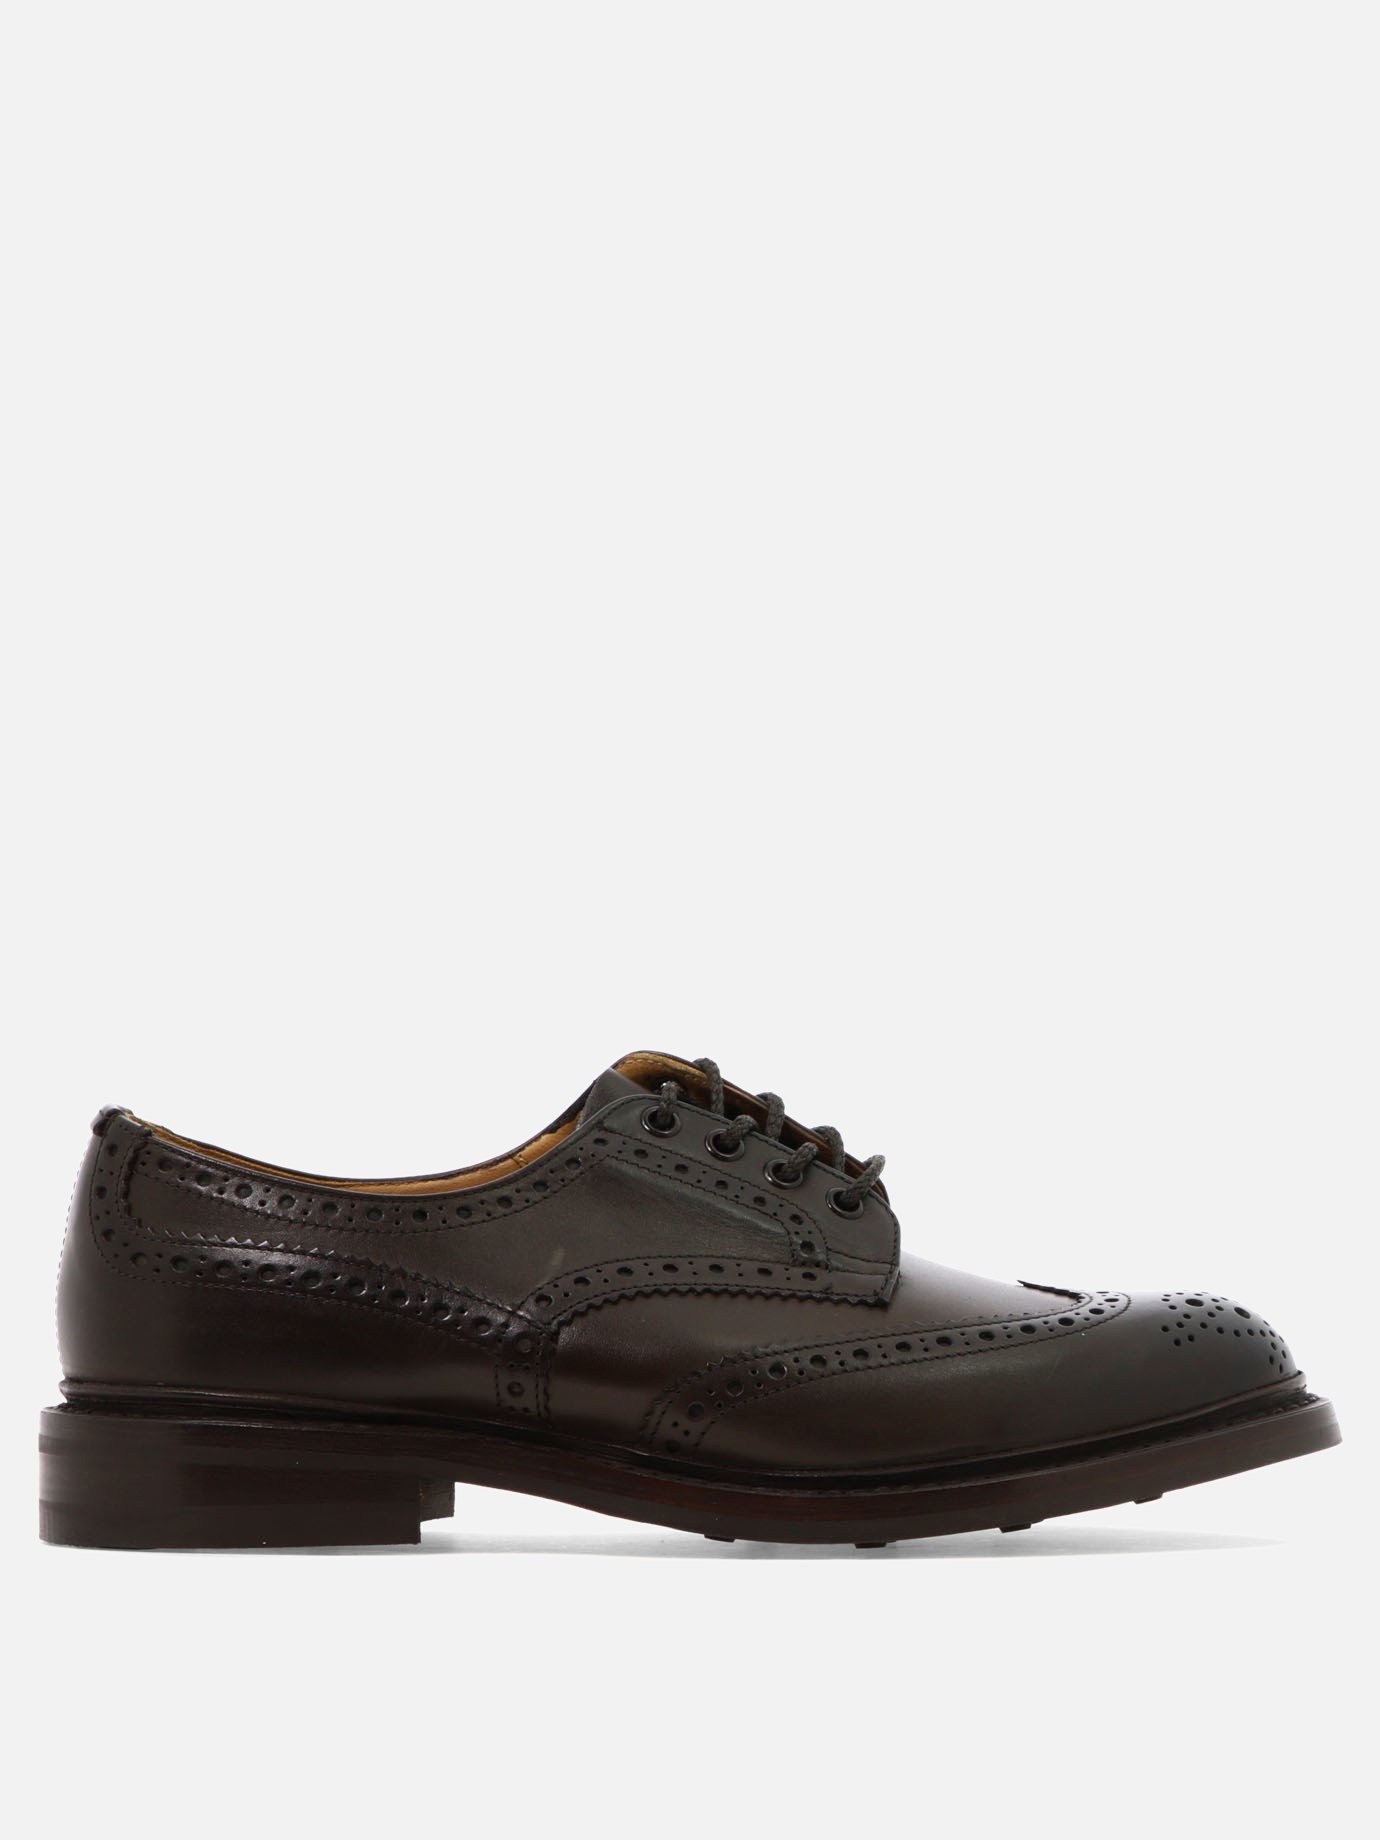  Bourton  lace-up shoesby Tricker's - 3